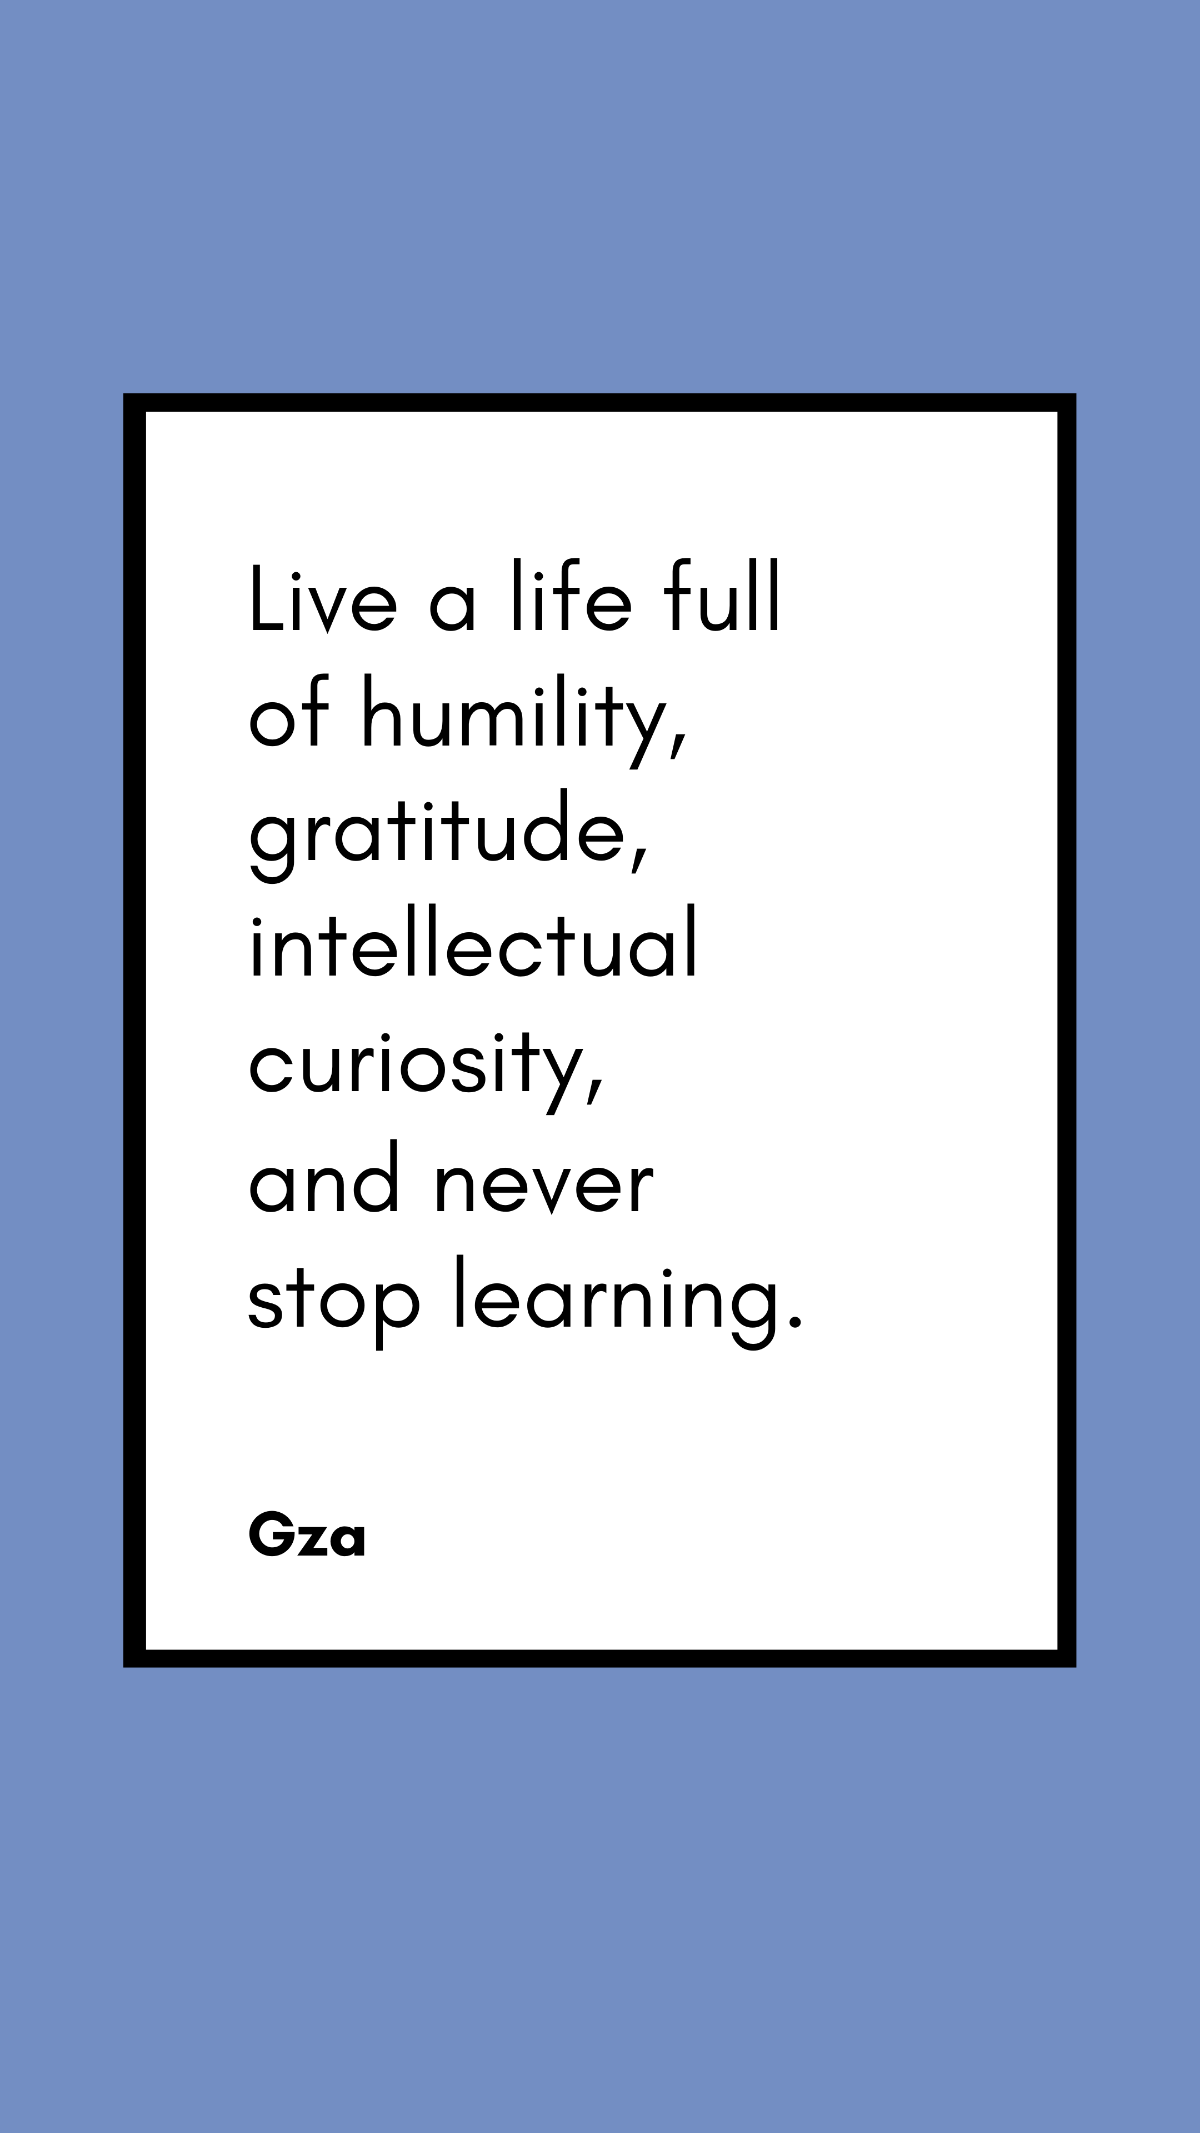 Gza - Live a life full of humility, gratitude, intellectual curiosity, and never stop learning. Template